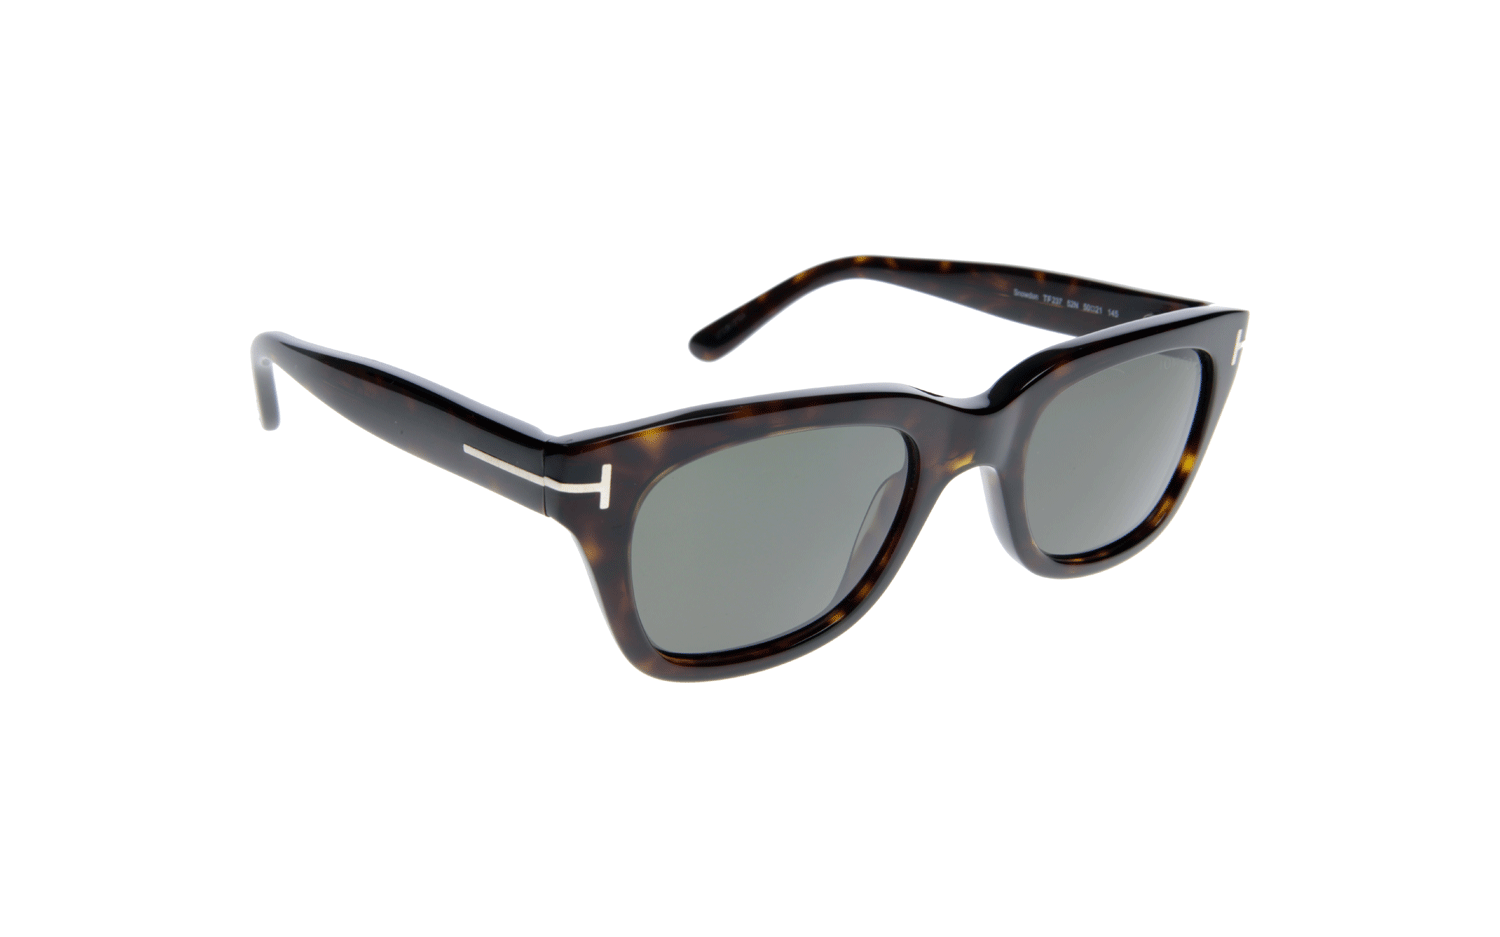 Tom Ford Sunglasses Lens Replacement | lupon.gov.ph